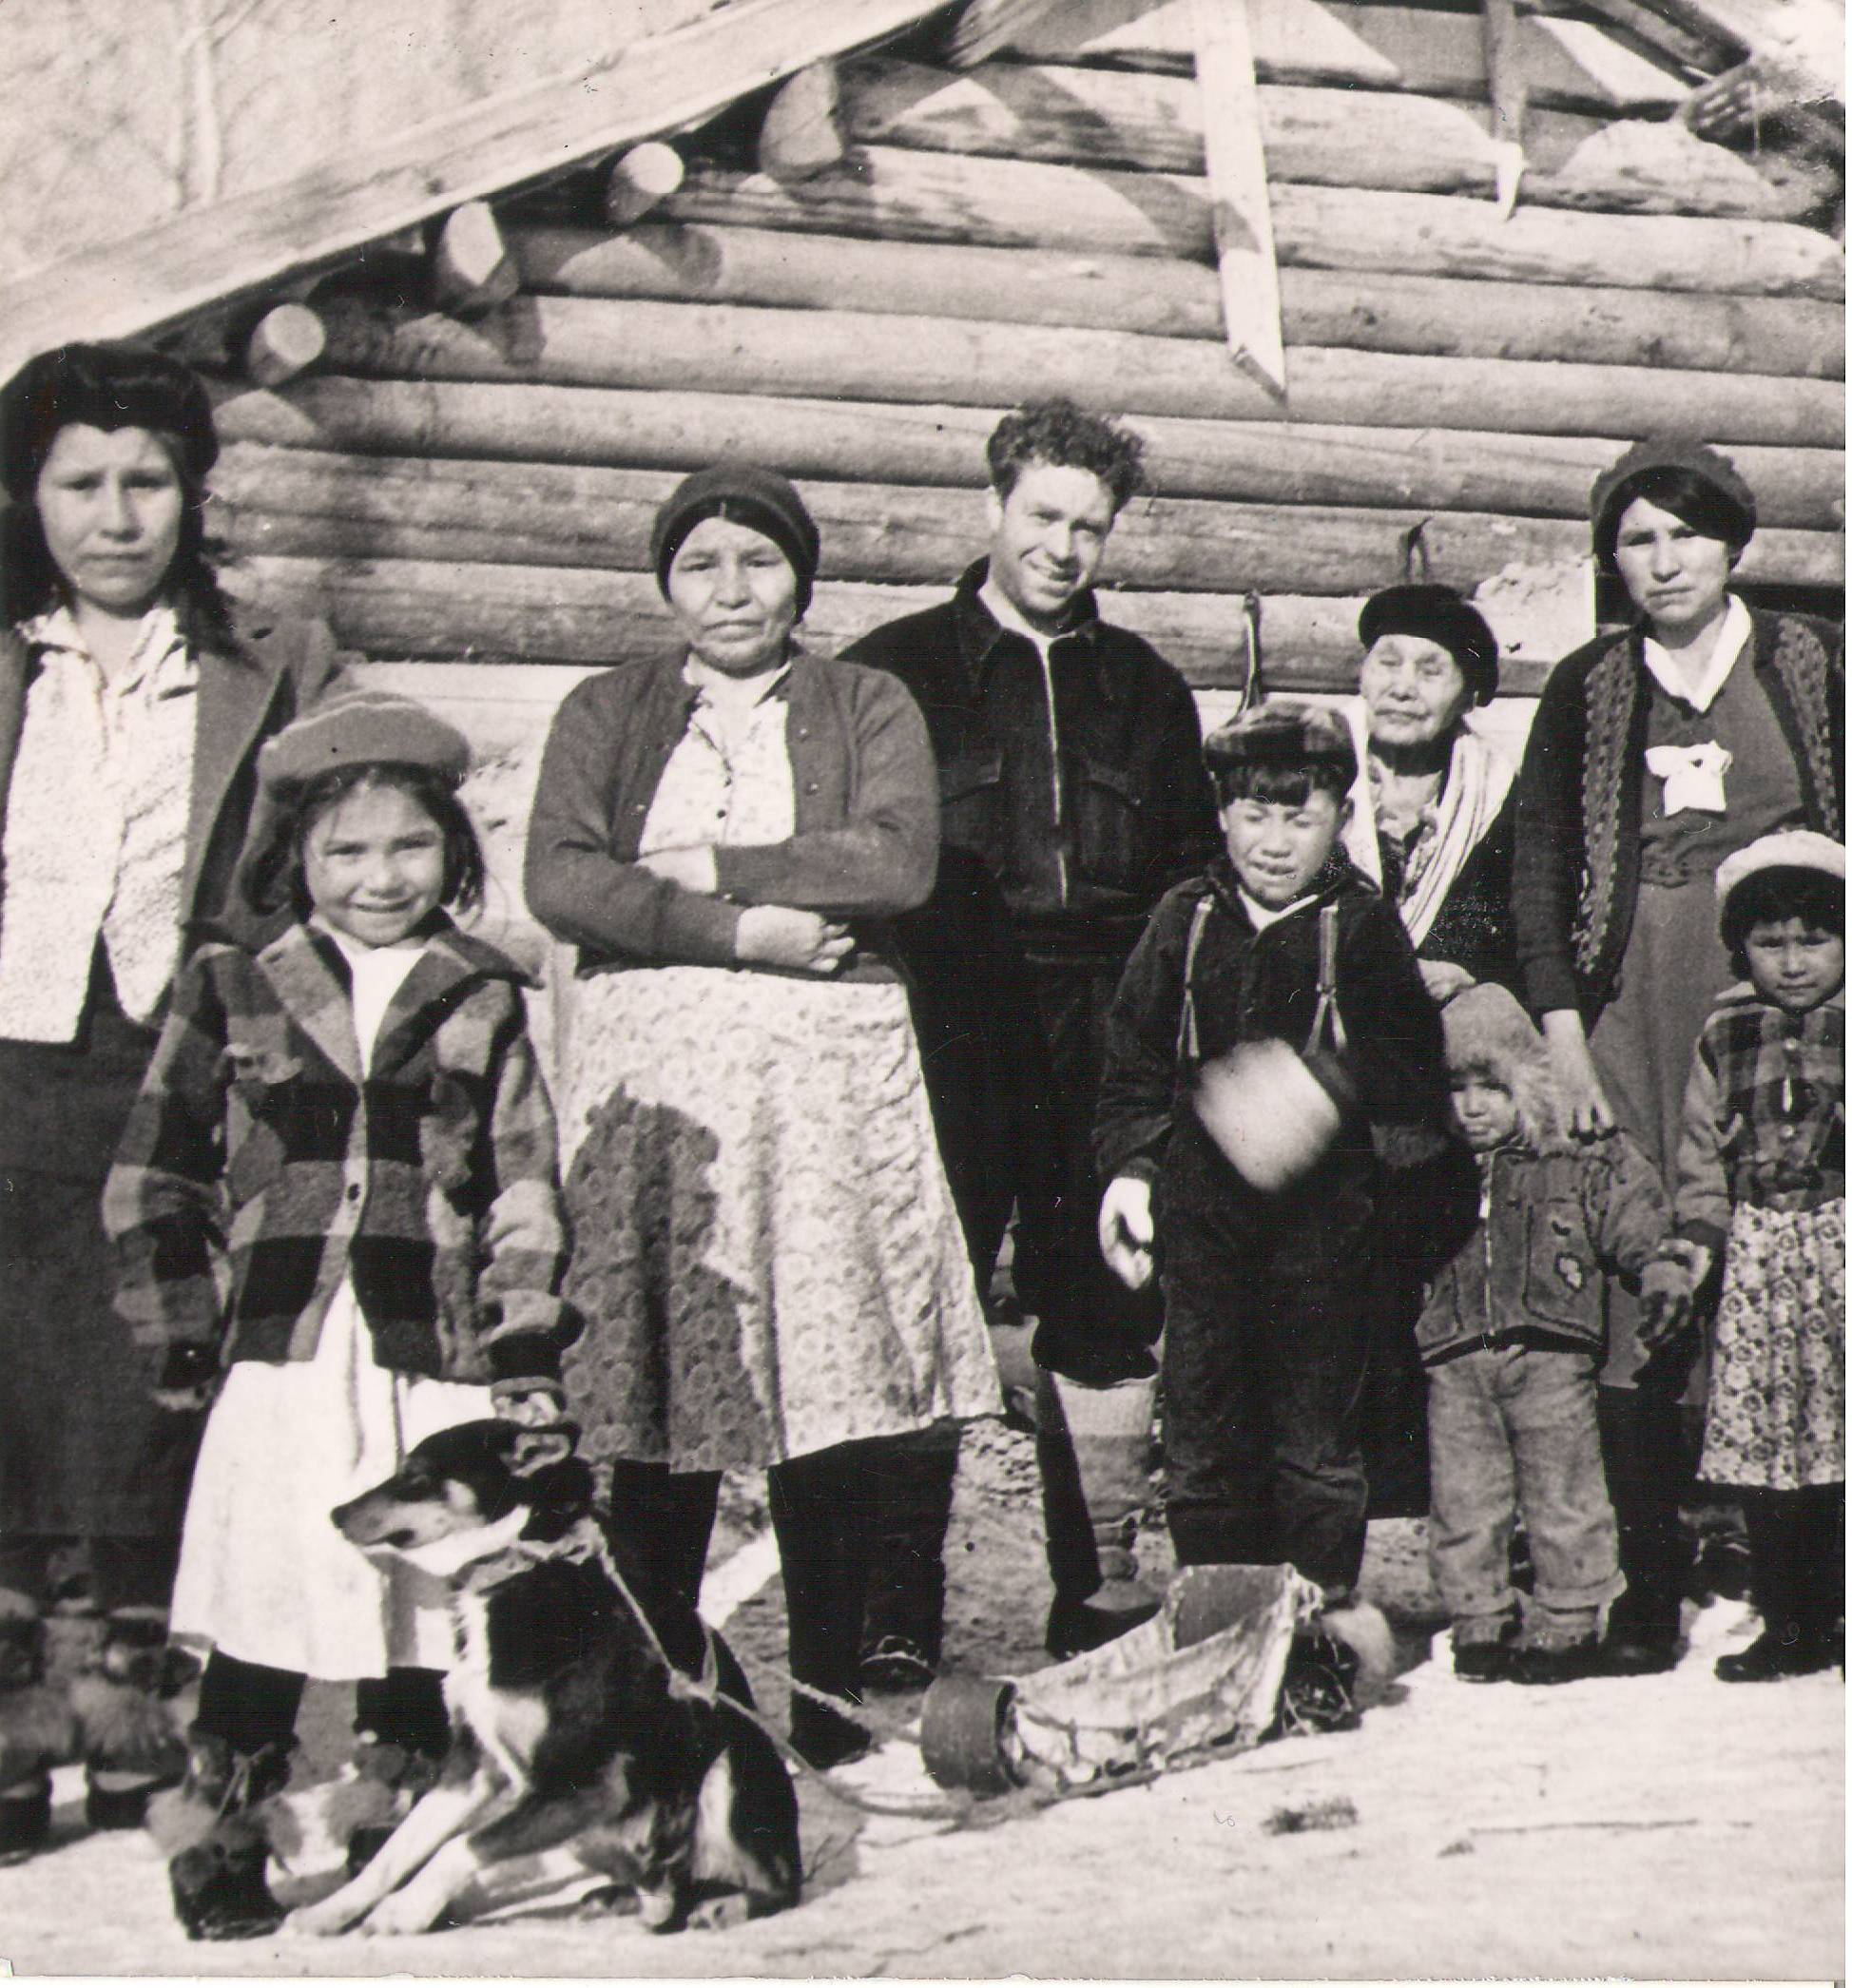 We are unsure where this picture was taken. We think the gentleman in the centre (Black Coat) is Harry Borbridge - he spent time all over northern Alberta. The other individuals are potentially a family that hosted him on his adventures. In any case we know very little about these people and would love to know more! Drop any details you wish to share in the comments!
990.4.79.167 / Reid, Gordon

PS. how cute is the girl and her sled dog in training in the front?

*EDIT*

The Group has been identified as such (L-R)  Maria Tallcree, Florence Nanooch, Nancy Metsikassus, Father Vandersteen, and Fred Tallcree. The other people are still unknown.